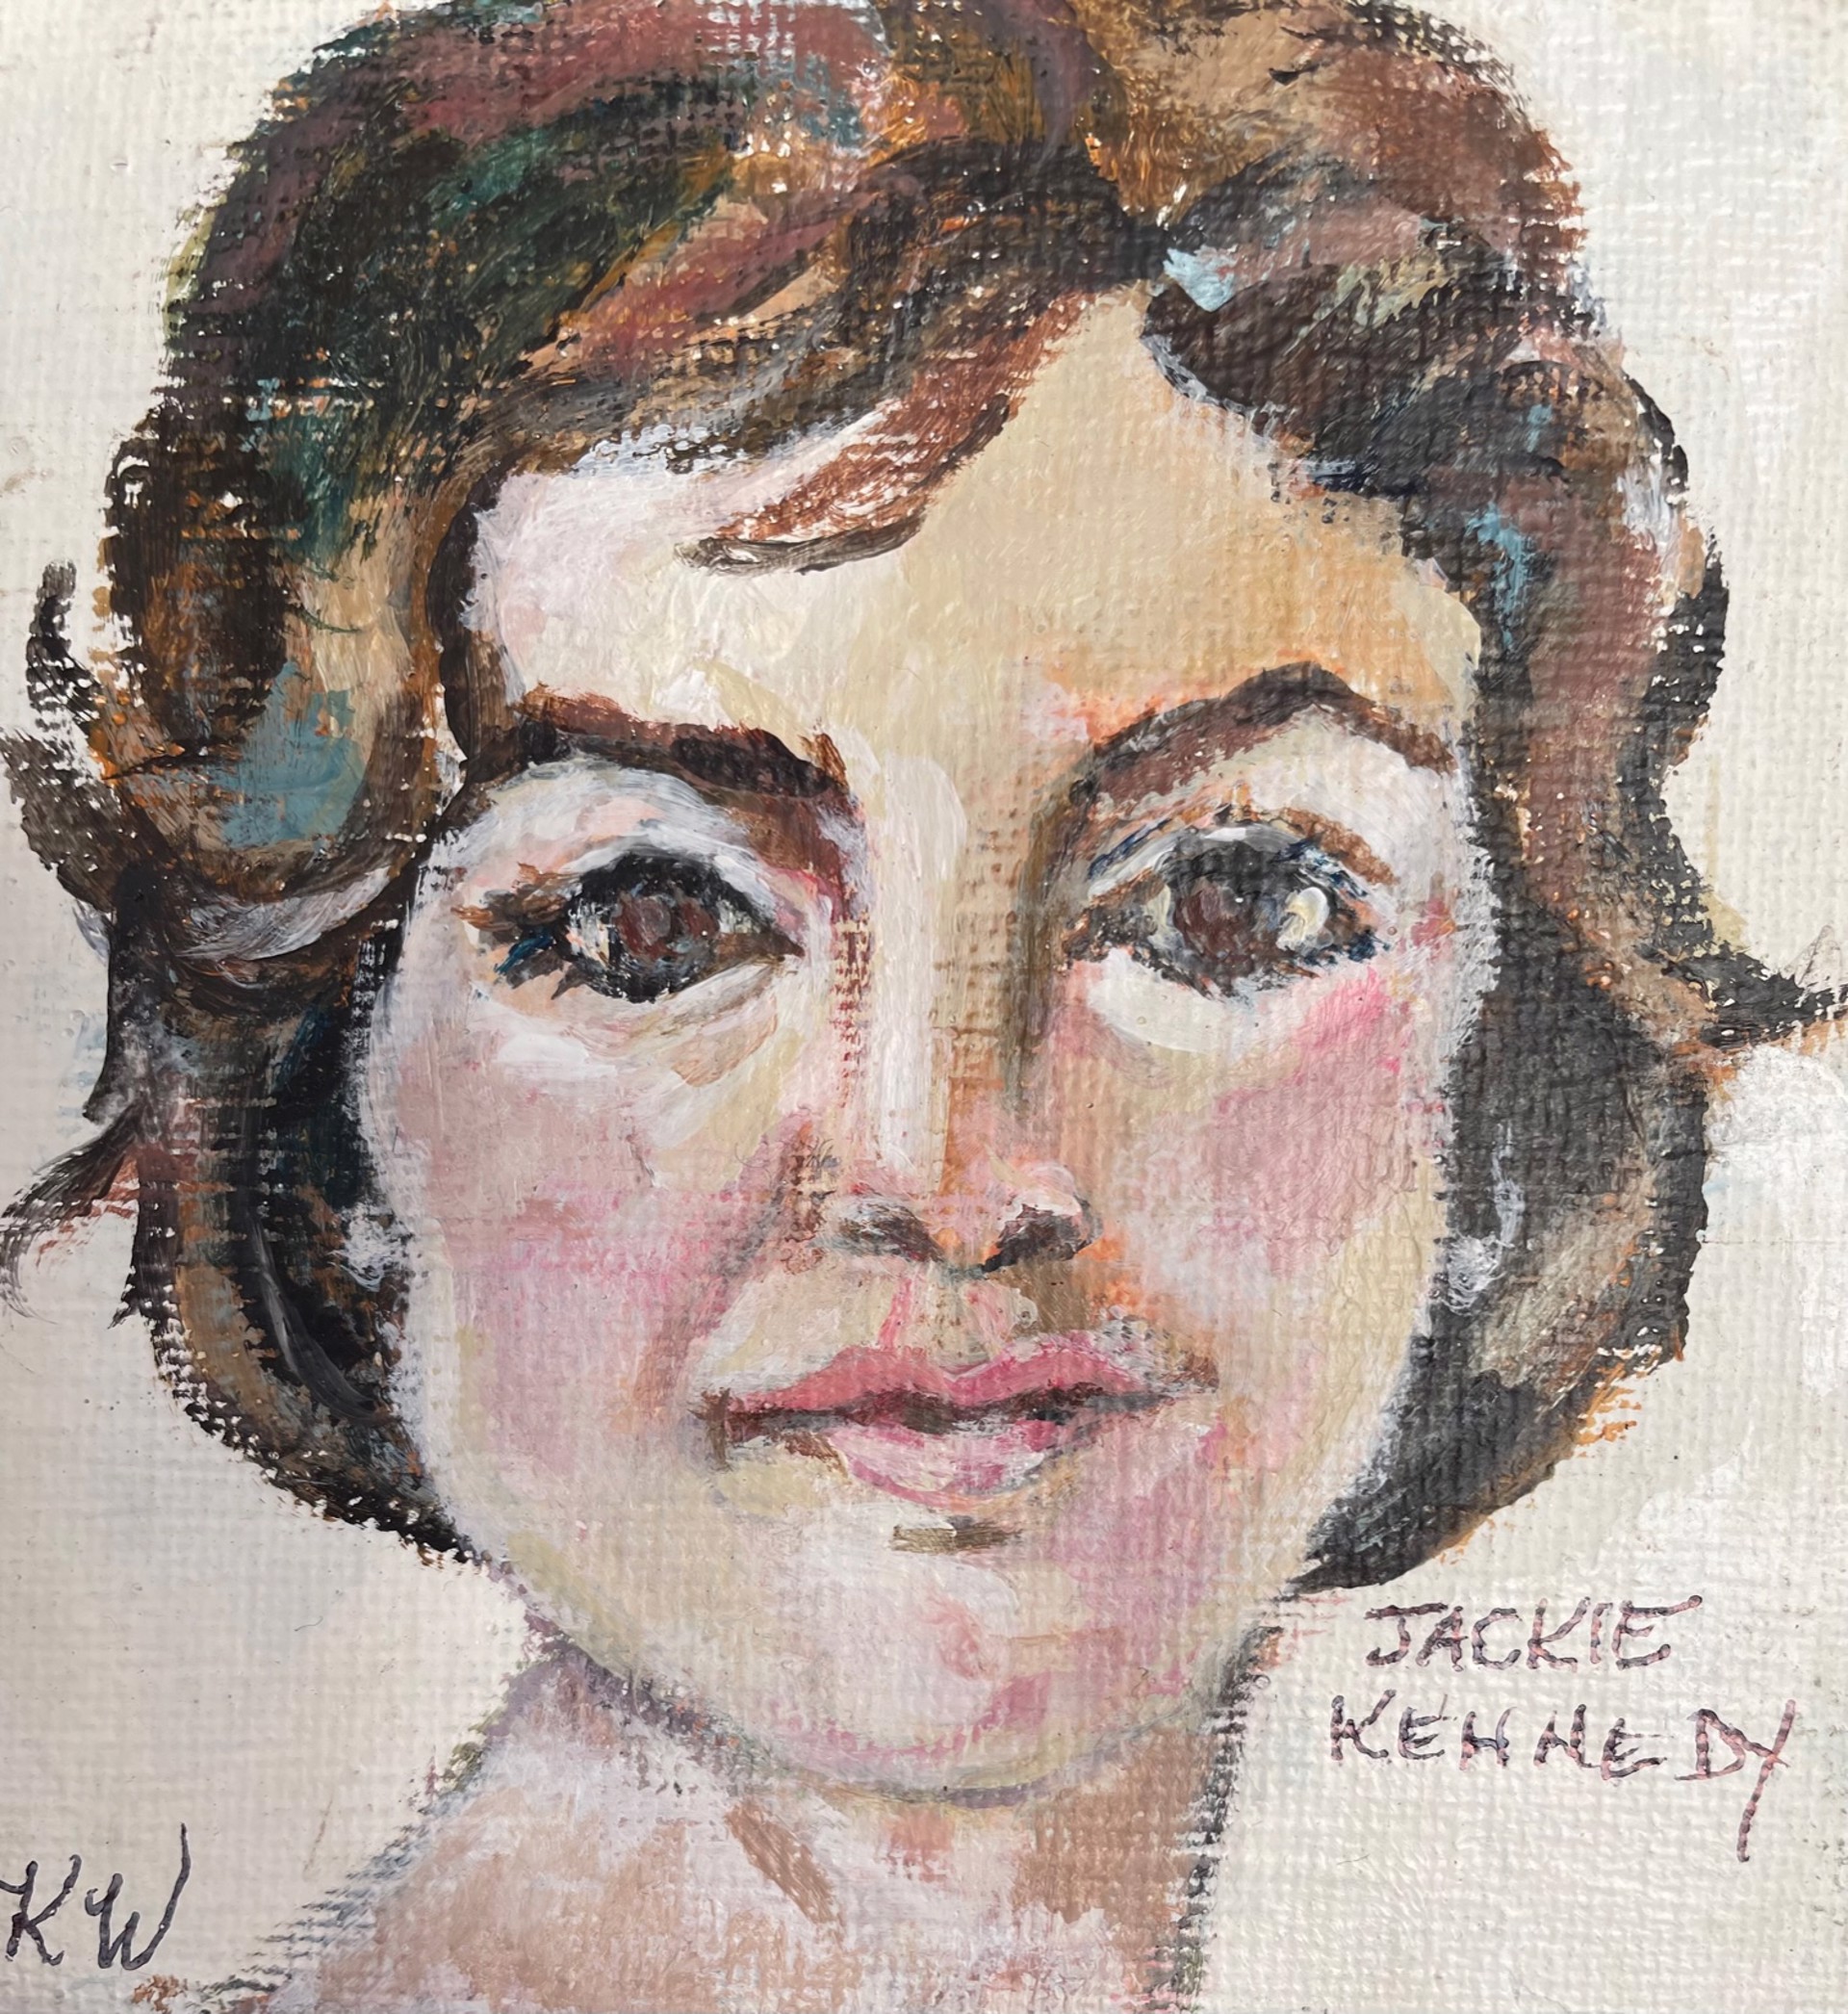 Jackie Kennedy Mini Painting by Kathy Willingham